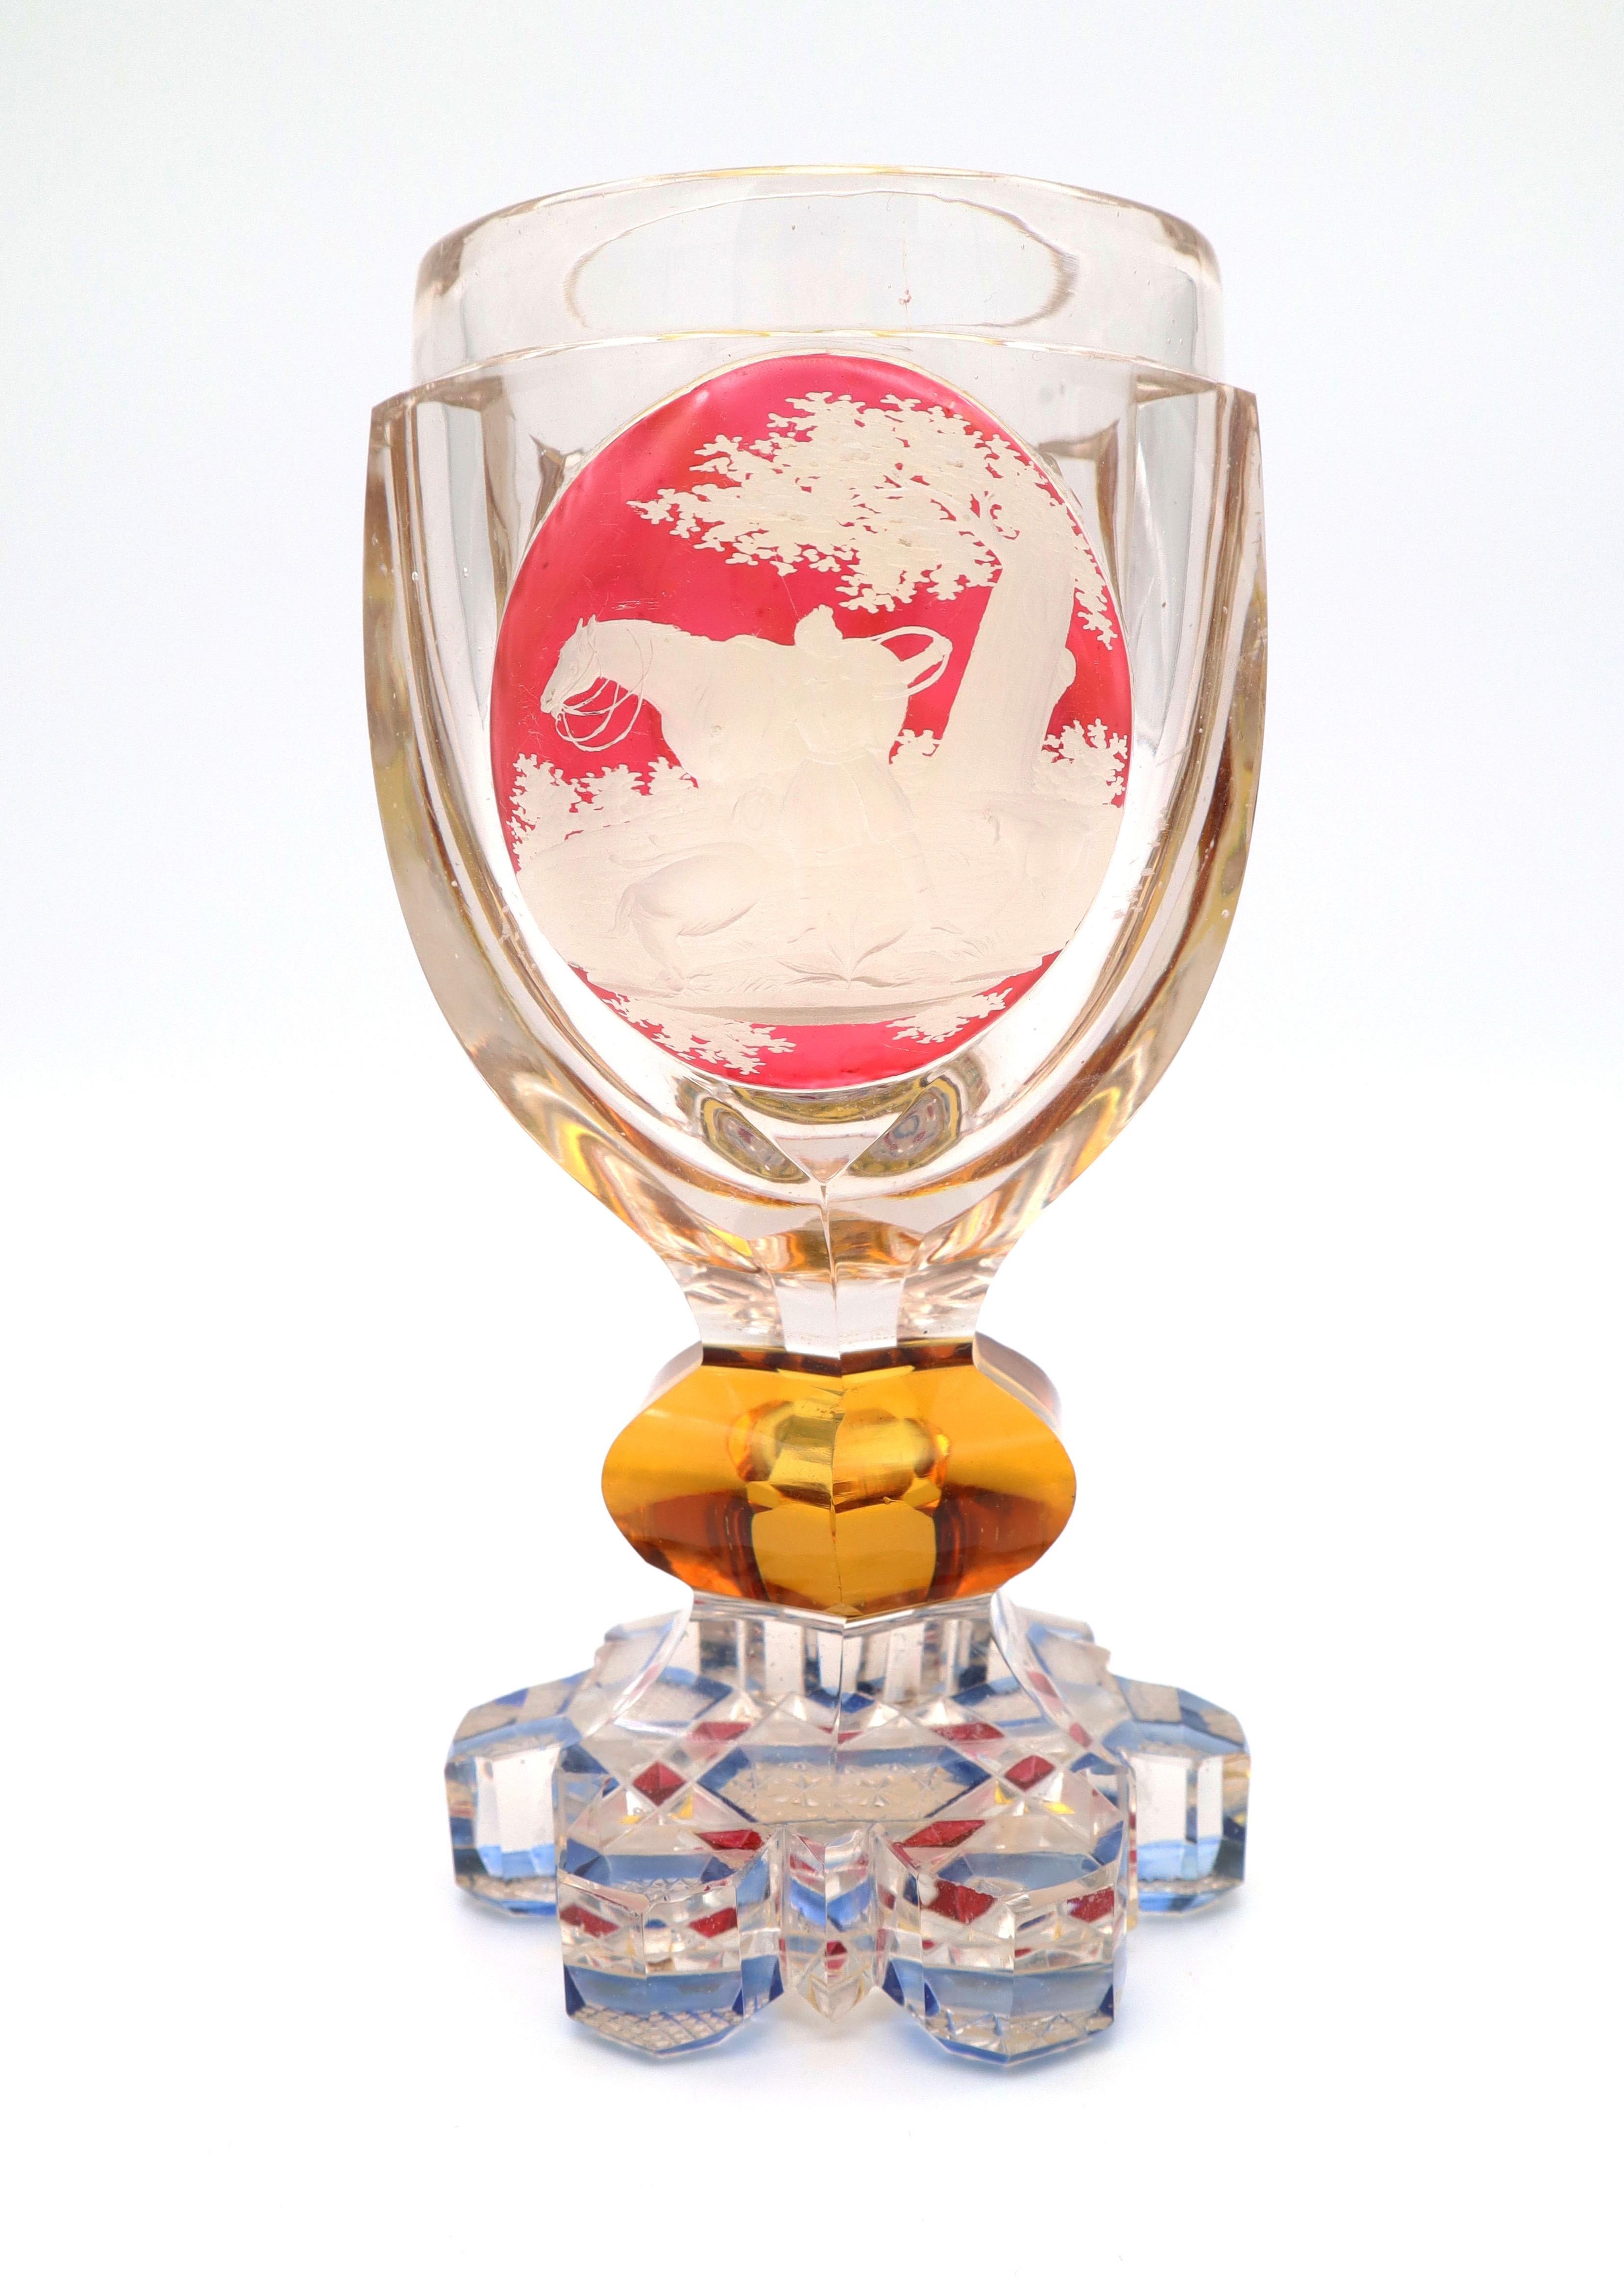 Engraved glass goblet showing a hunt scene on the front, which was accounted for a period of the German and Austrian glass production throughout the eighteenth century.
Its stained, multicolored socket and the star, engraved bottom are typical for